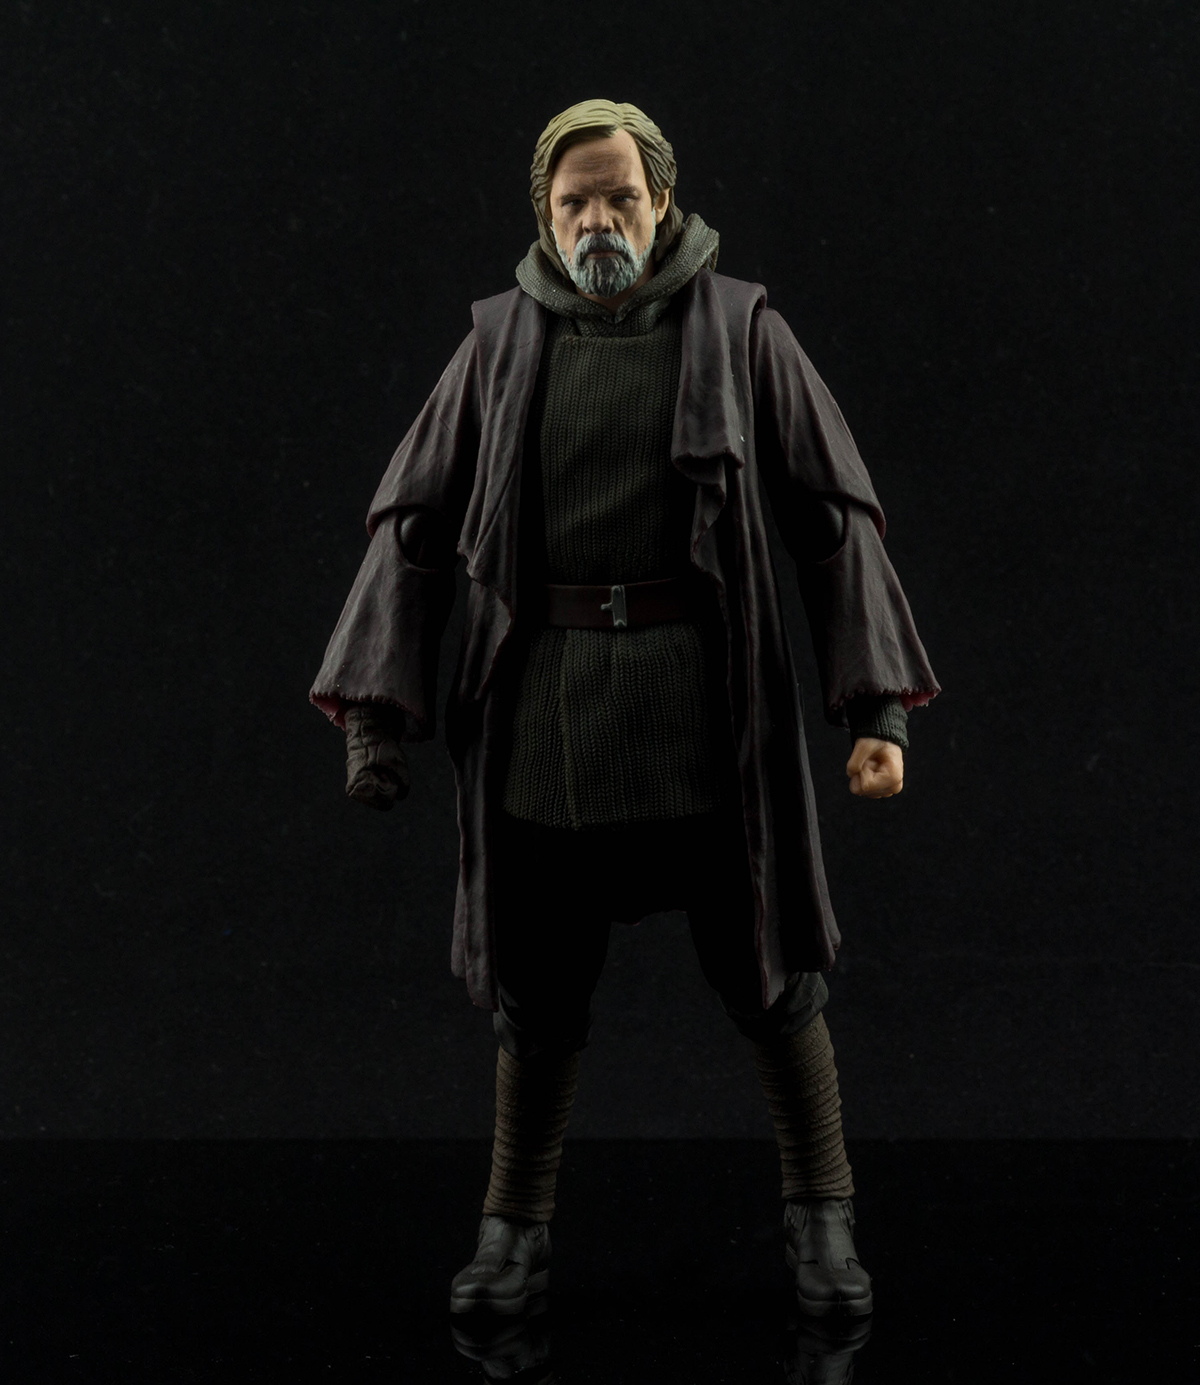 S.H. Figuarts Luke Skywalker The Last Jedi Review - Toys With 'Tude!